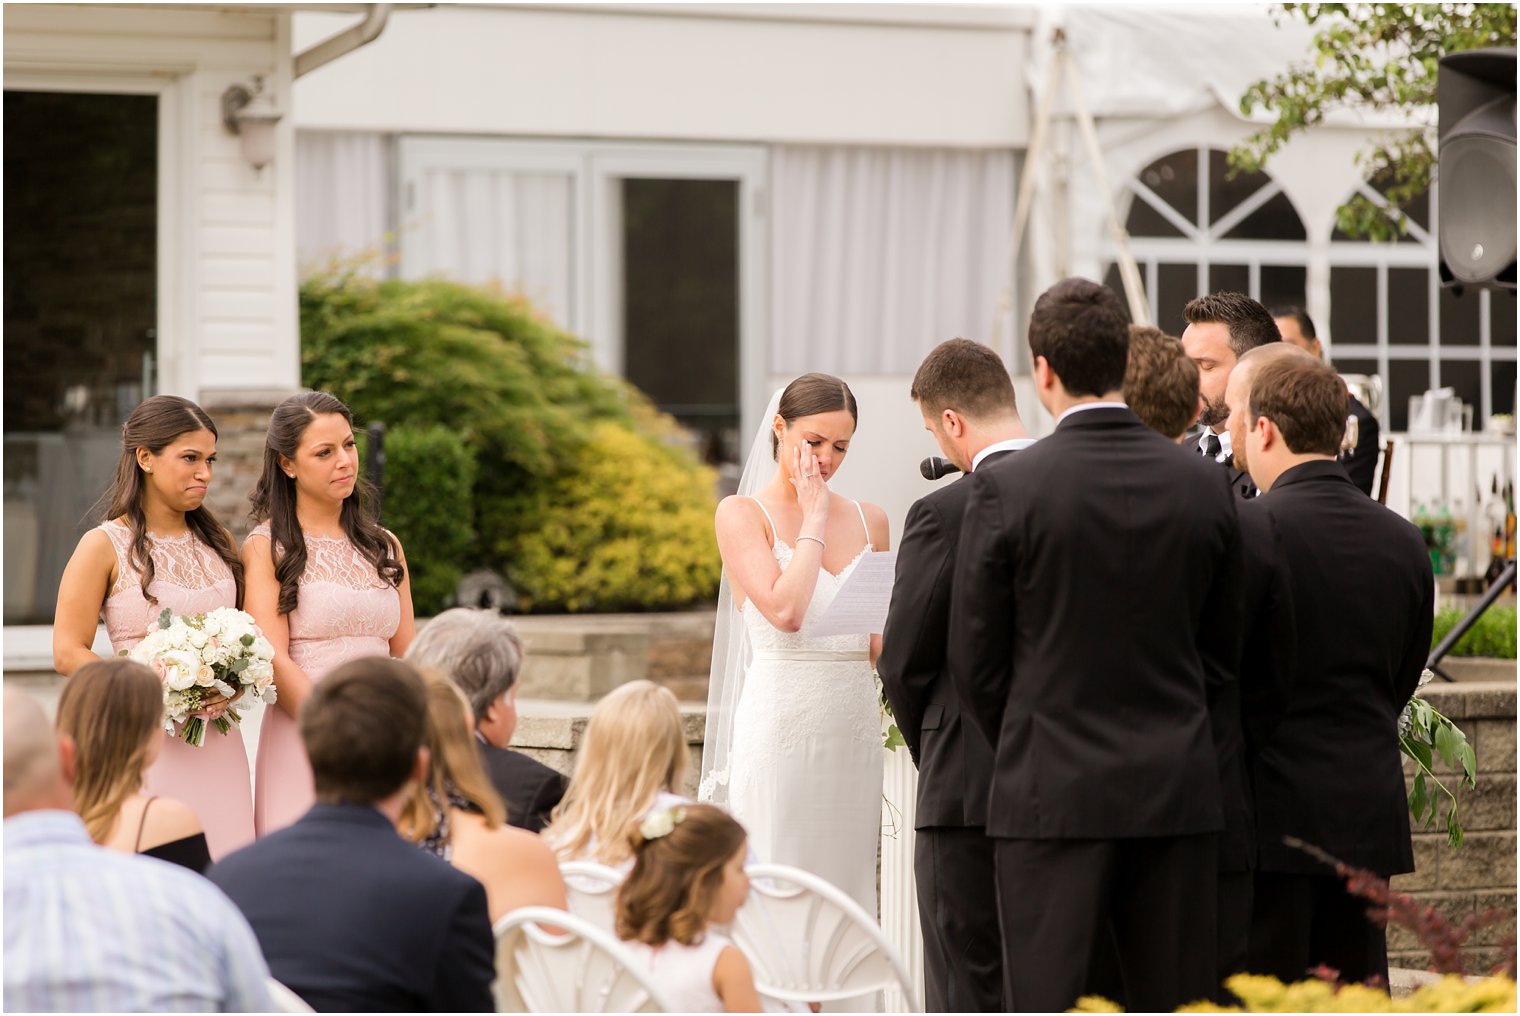 Tearful bride at Windows on the Water at Frogbridge | Photos by Idalia Photography